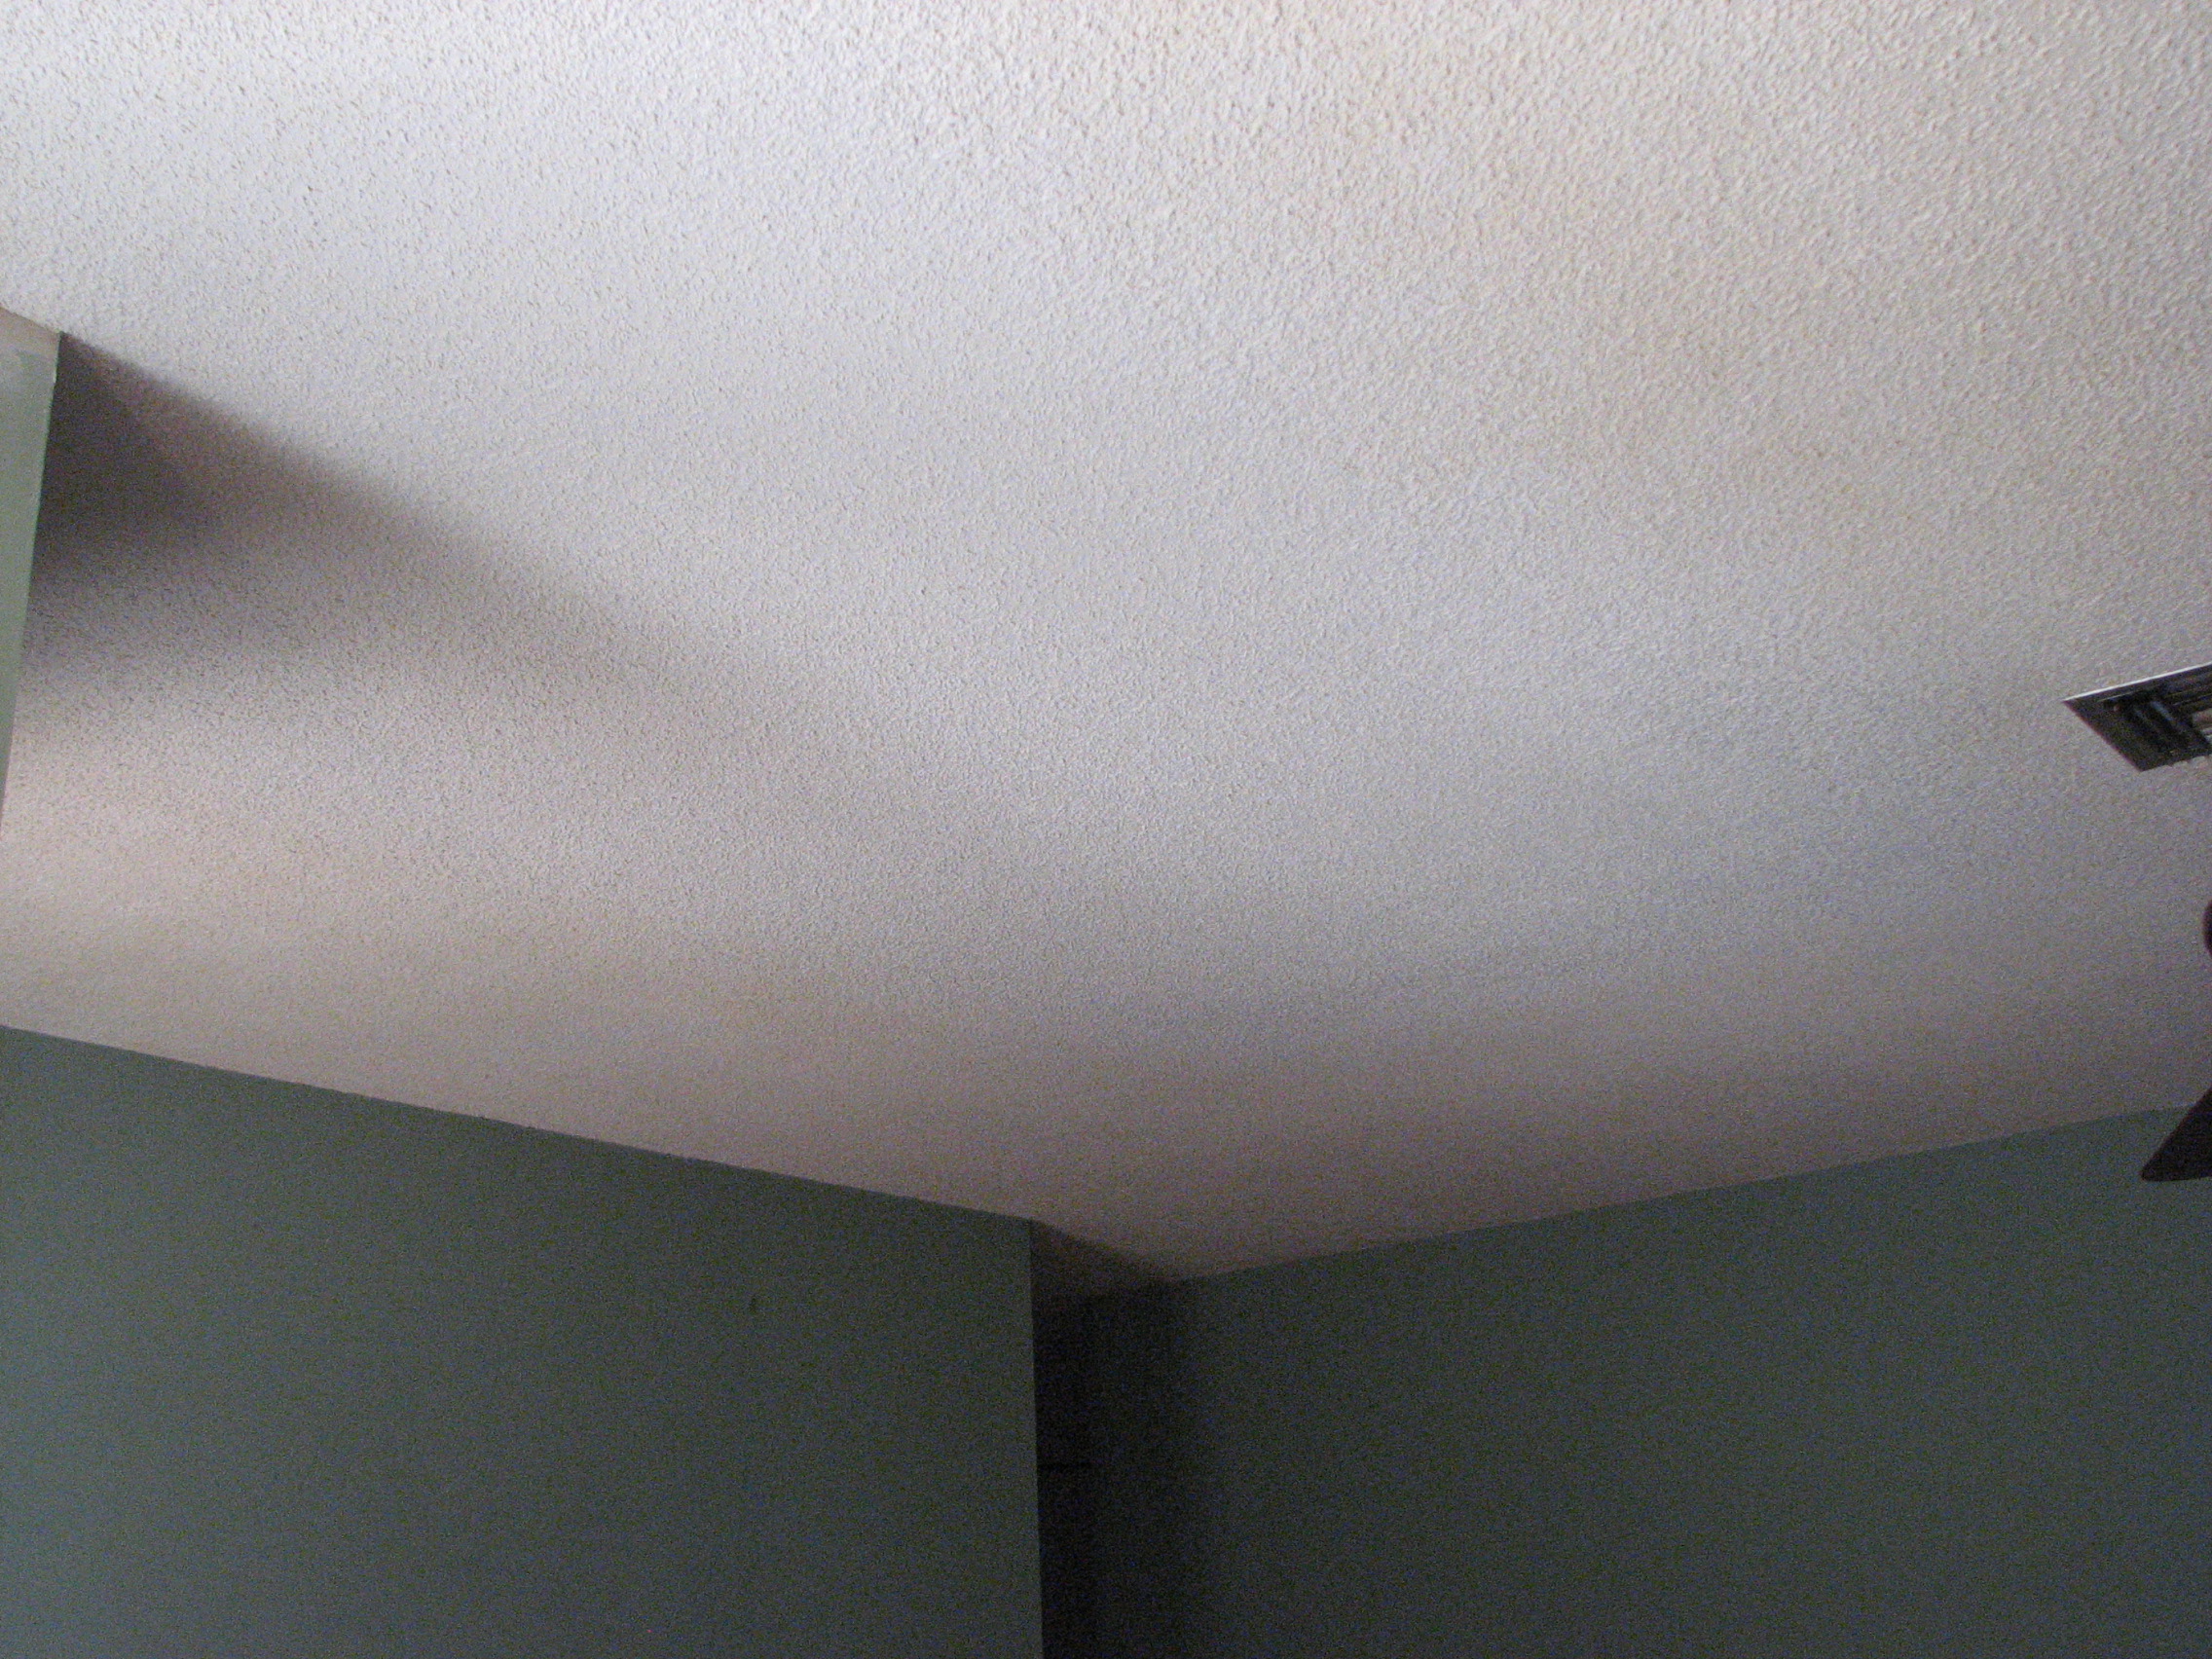 Living Room Water Damaged Drywall Ceiling Repaired And